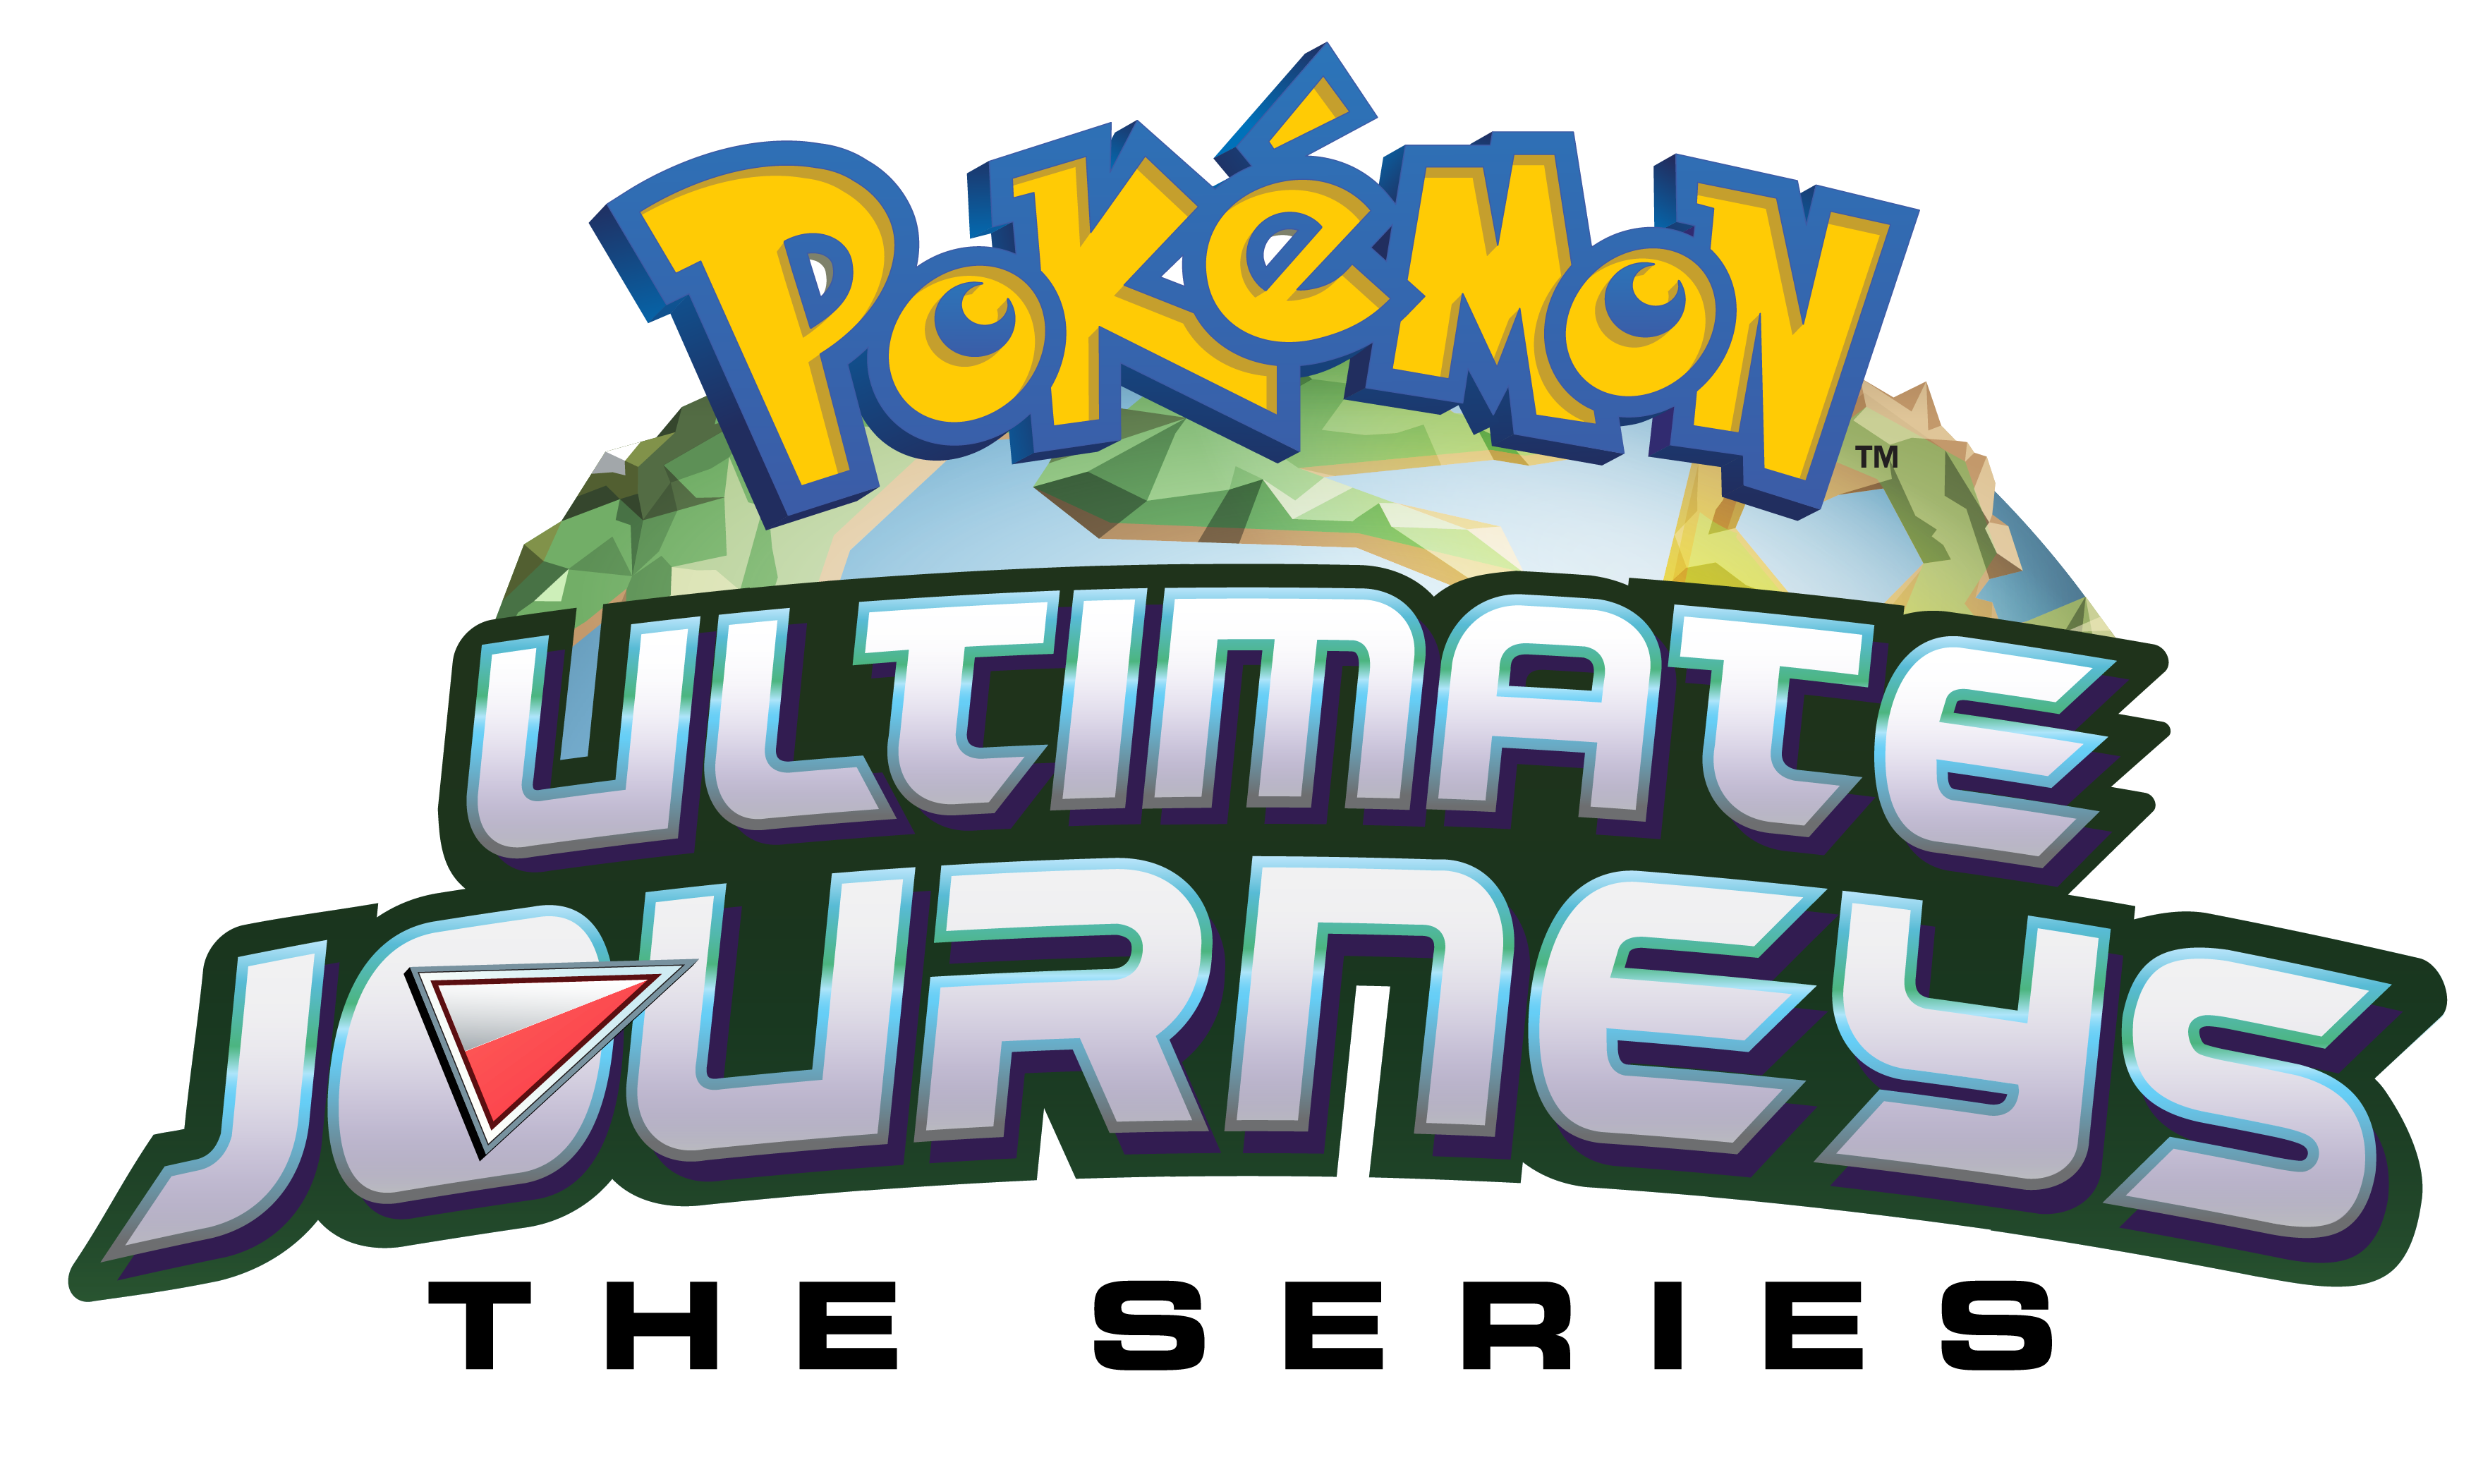 When is Pokemon Ultimate Journeys coming to Netflix? Release date